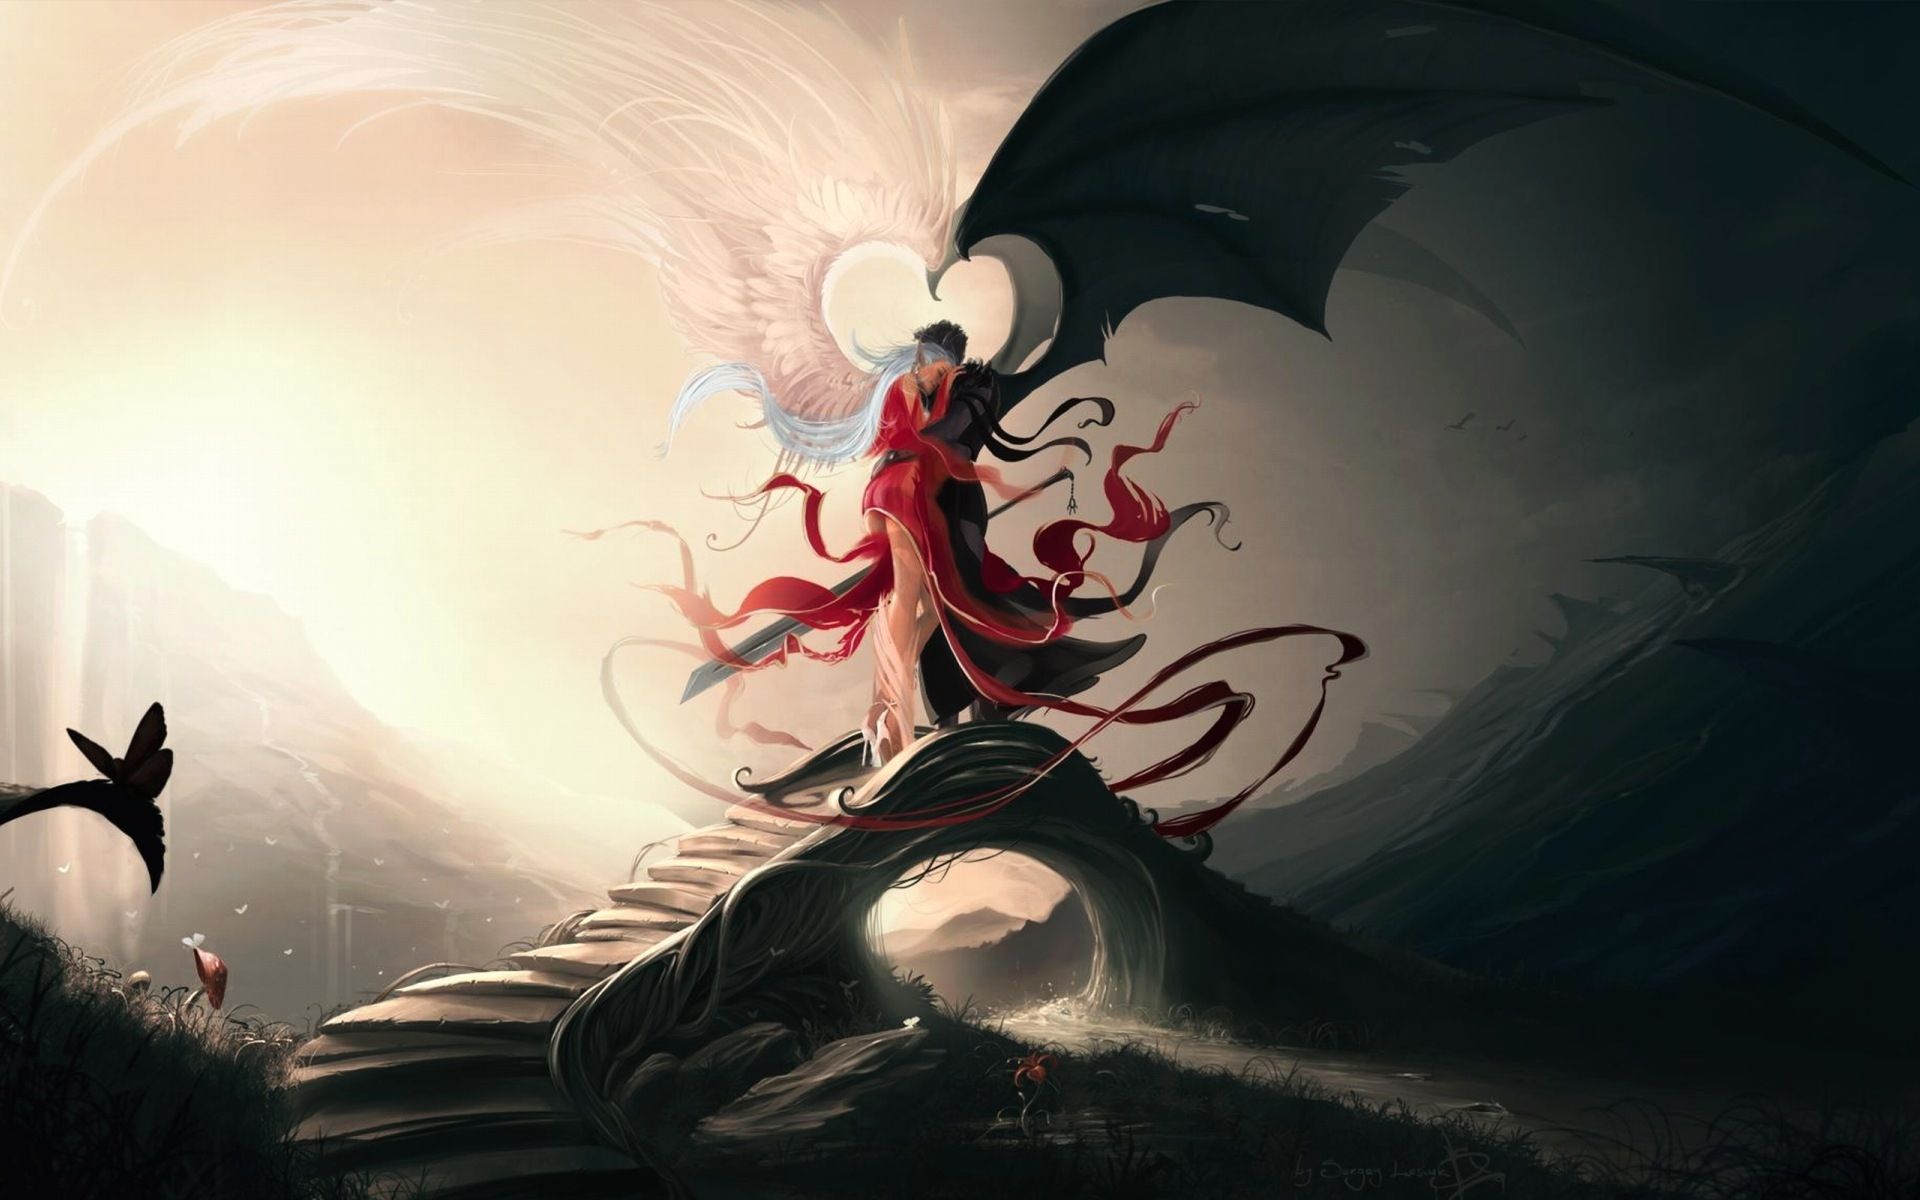 Tons of awesome anime angel and demon wallpapers to download for free. 